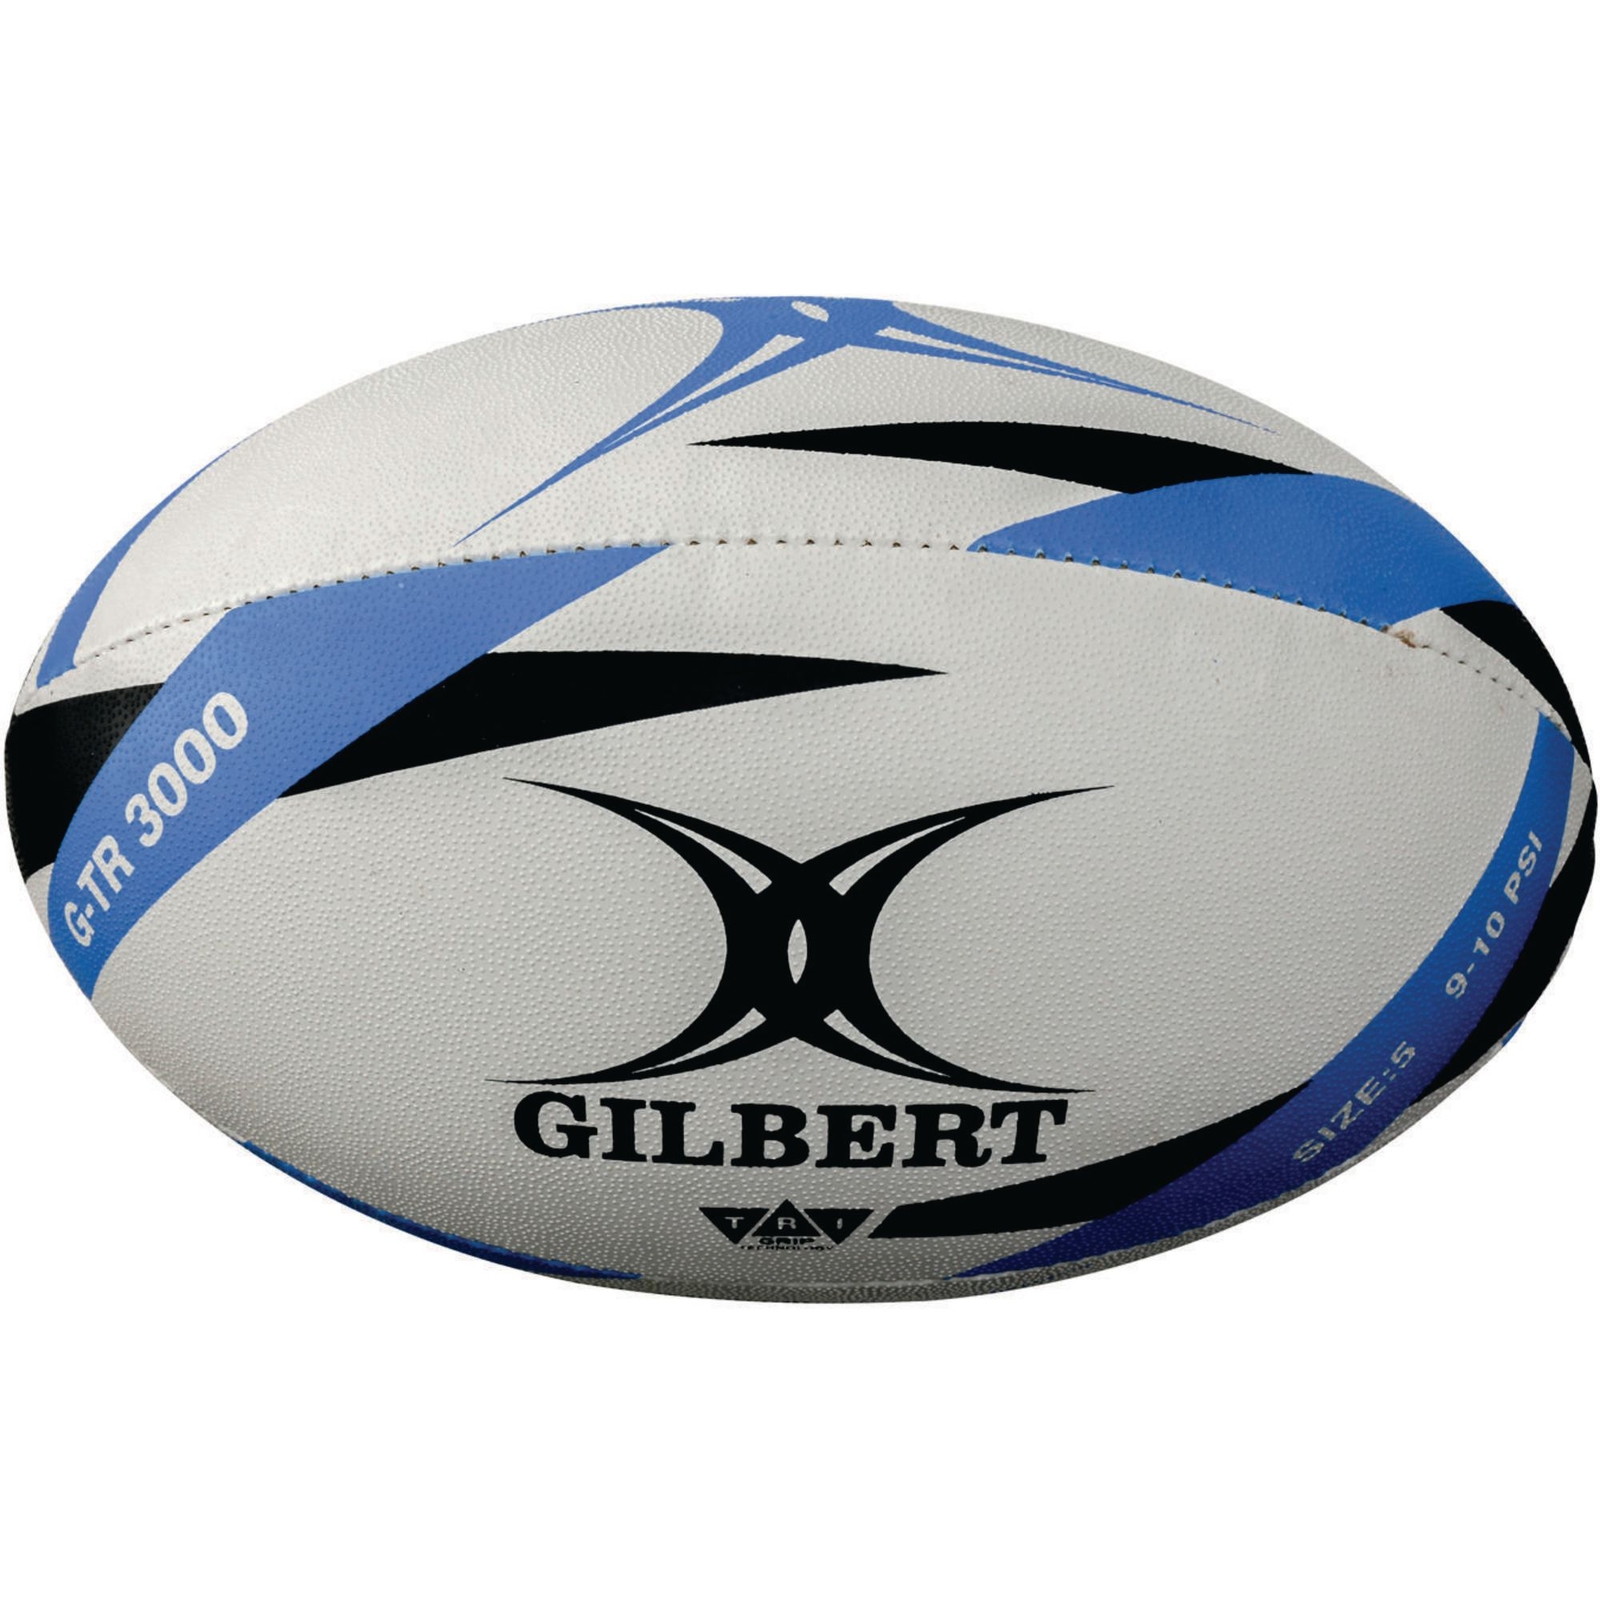 Gilbert G-TR3000 Trainer Rugby Ball - White/Blue - Size 5